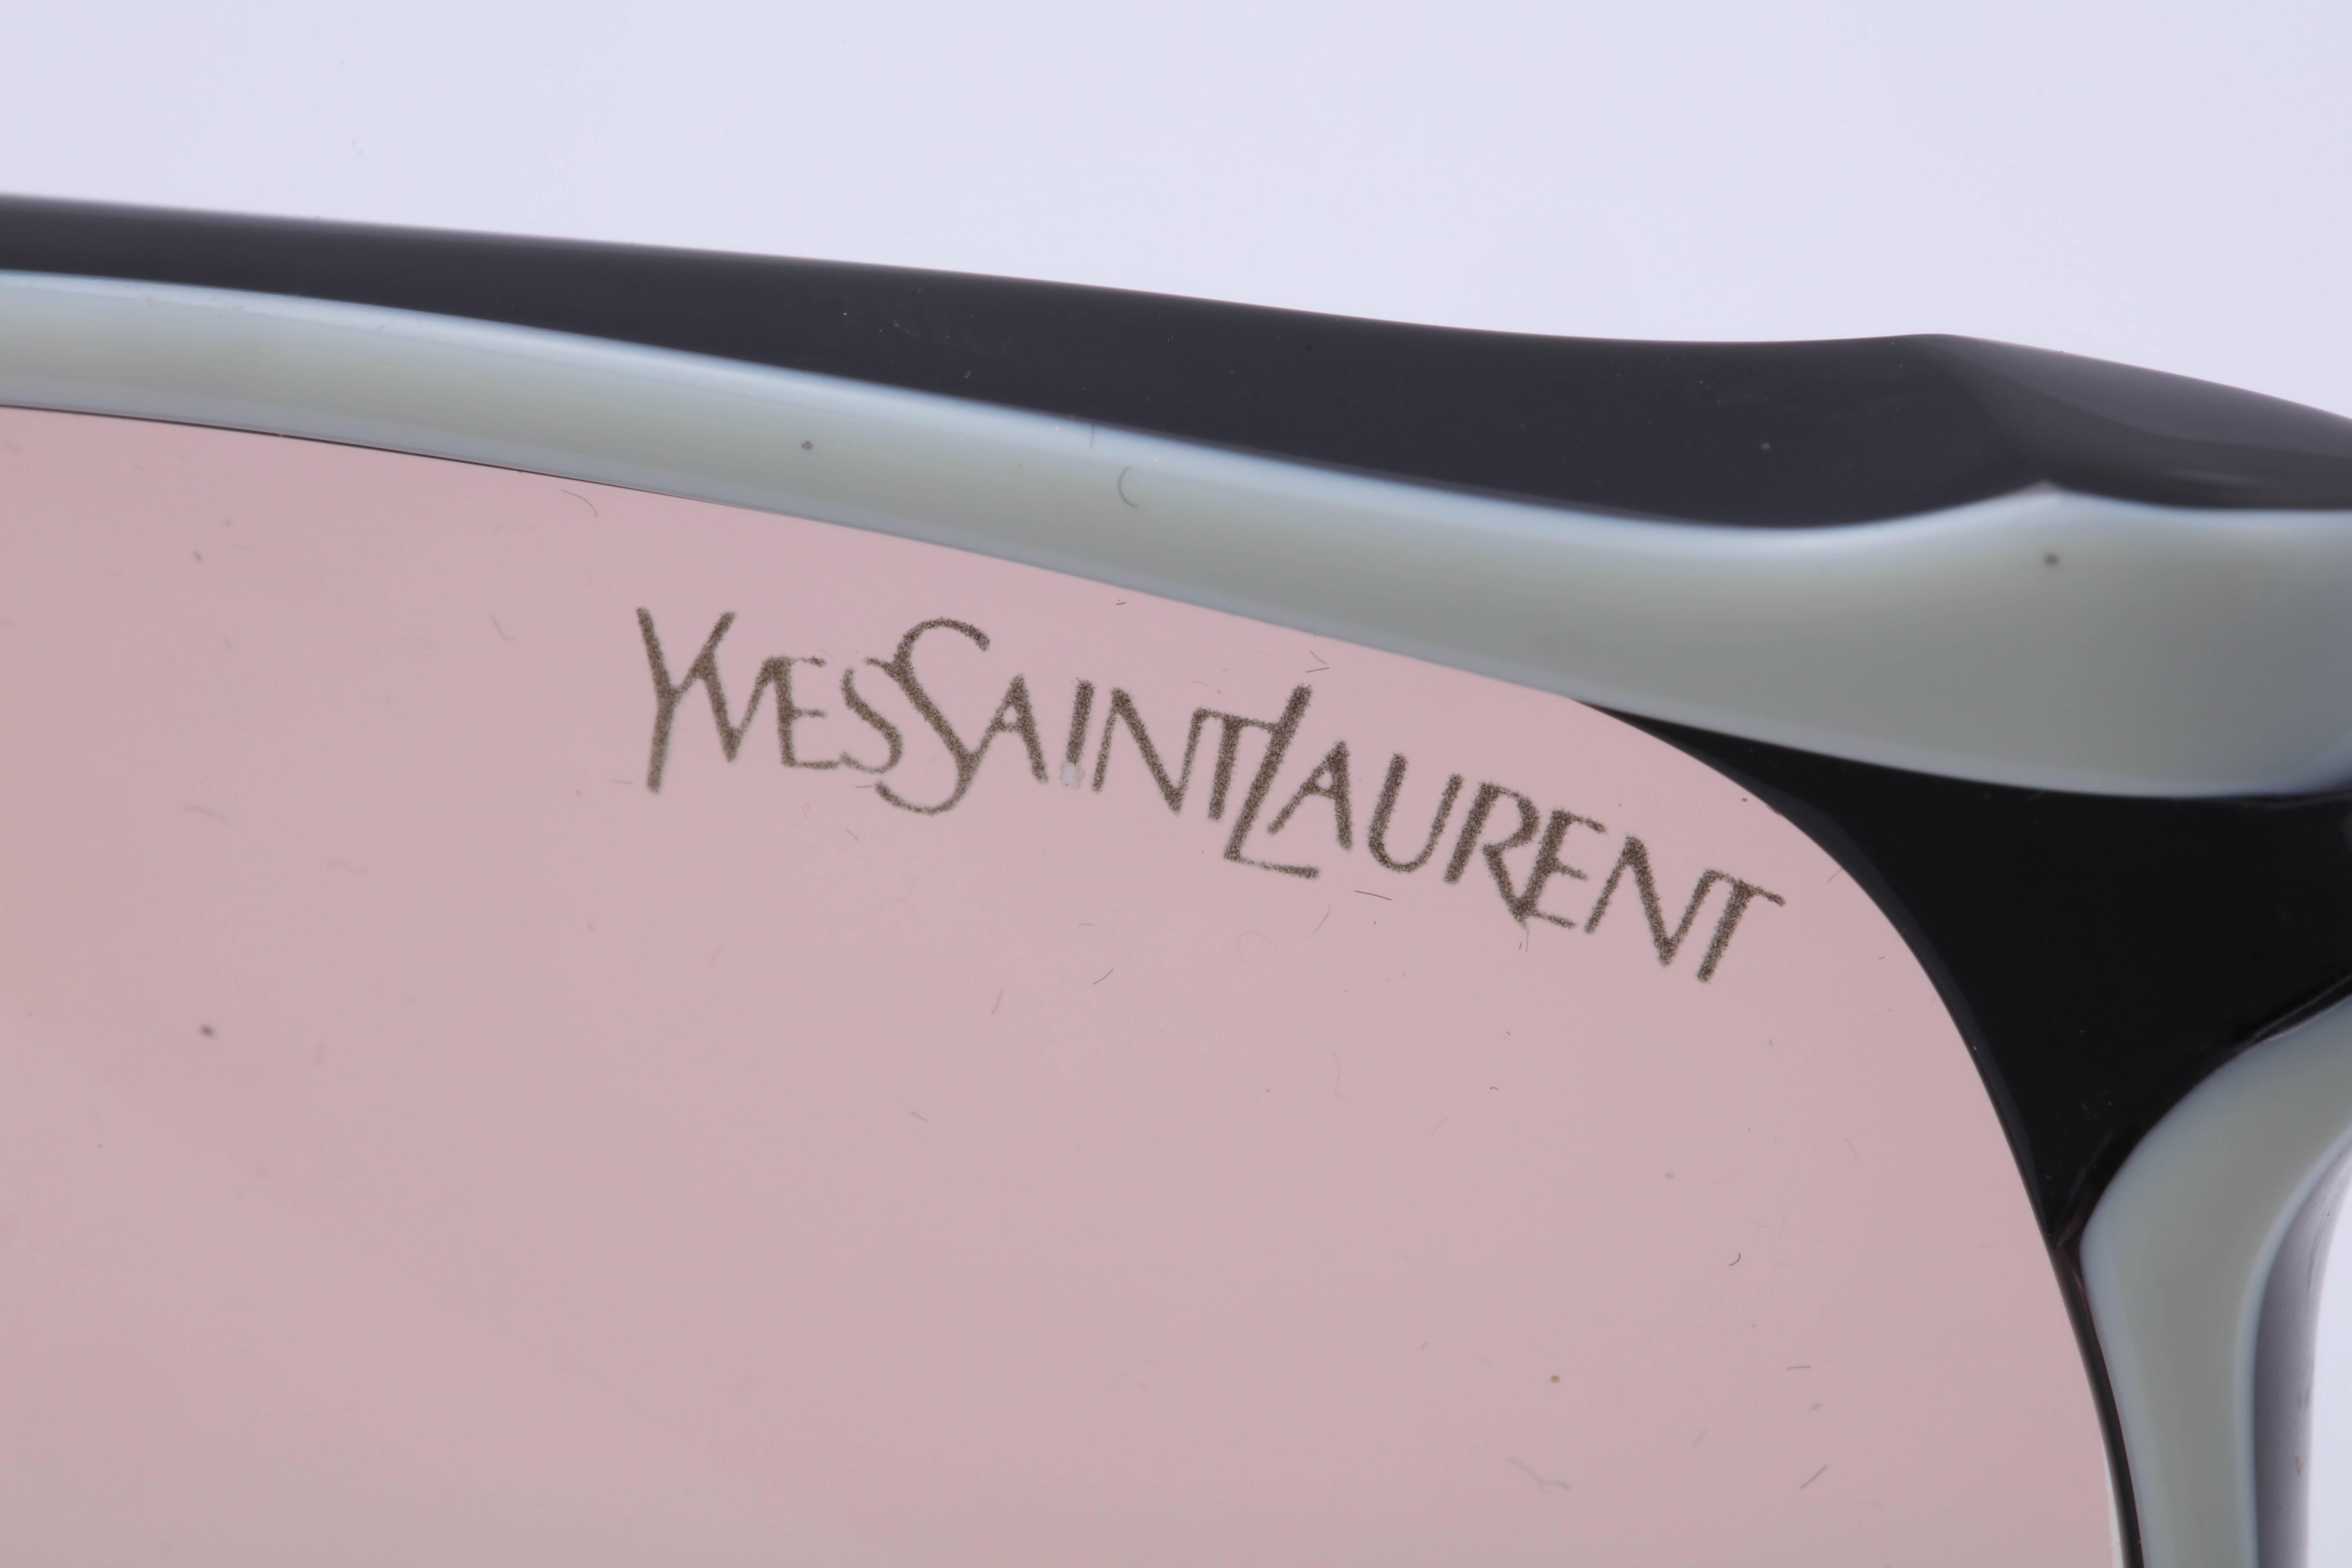 Yves Saint Laurent YSL Vintage Sunglasses  In Excellent Condition For Sale In Chicago, IL